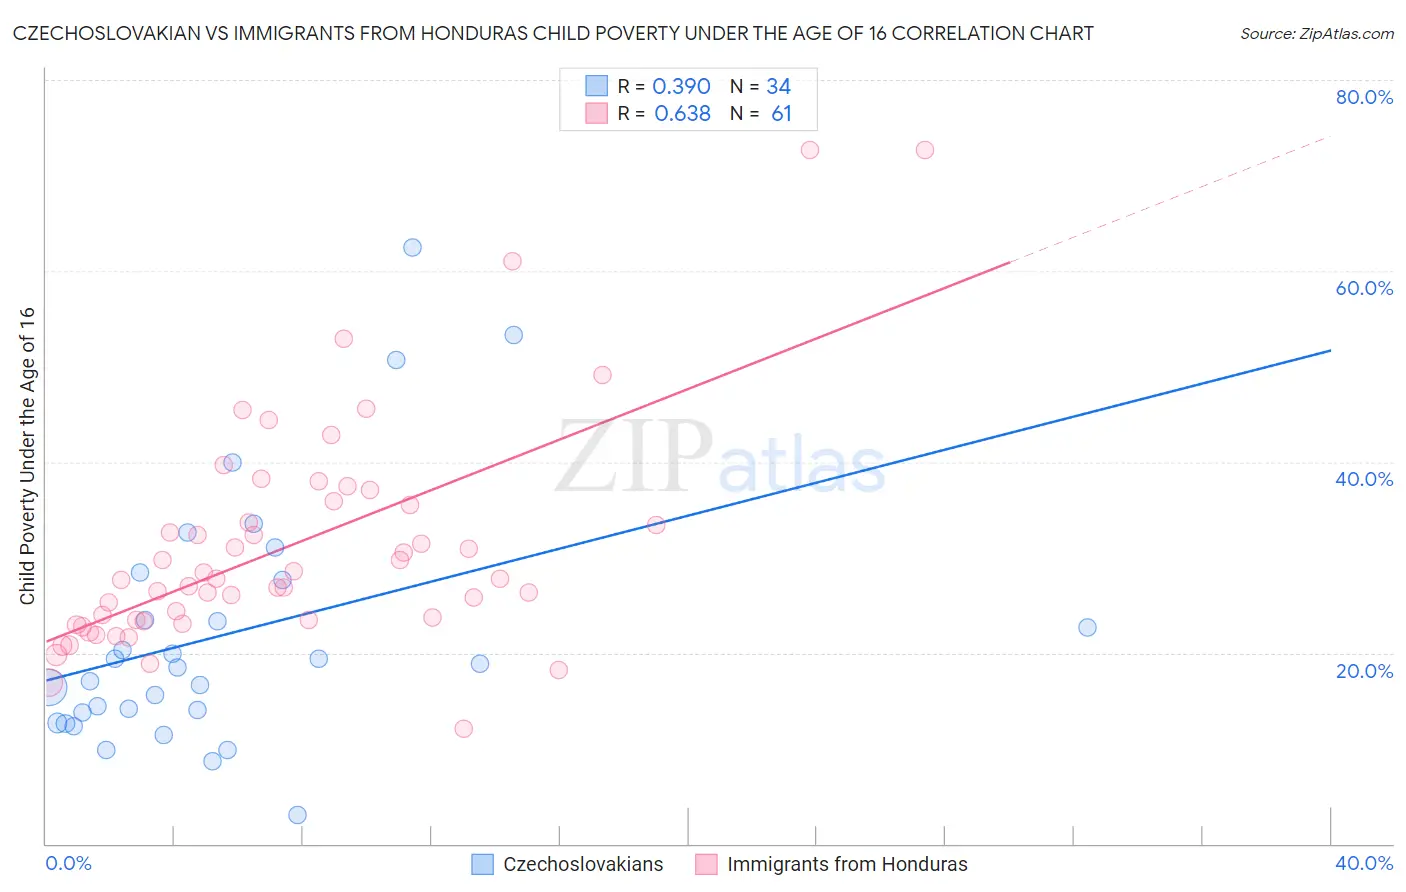 Czechoslovakian vs Immigrants from Honduras Child Poverty Under the Age of 16